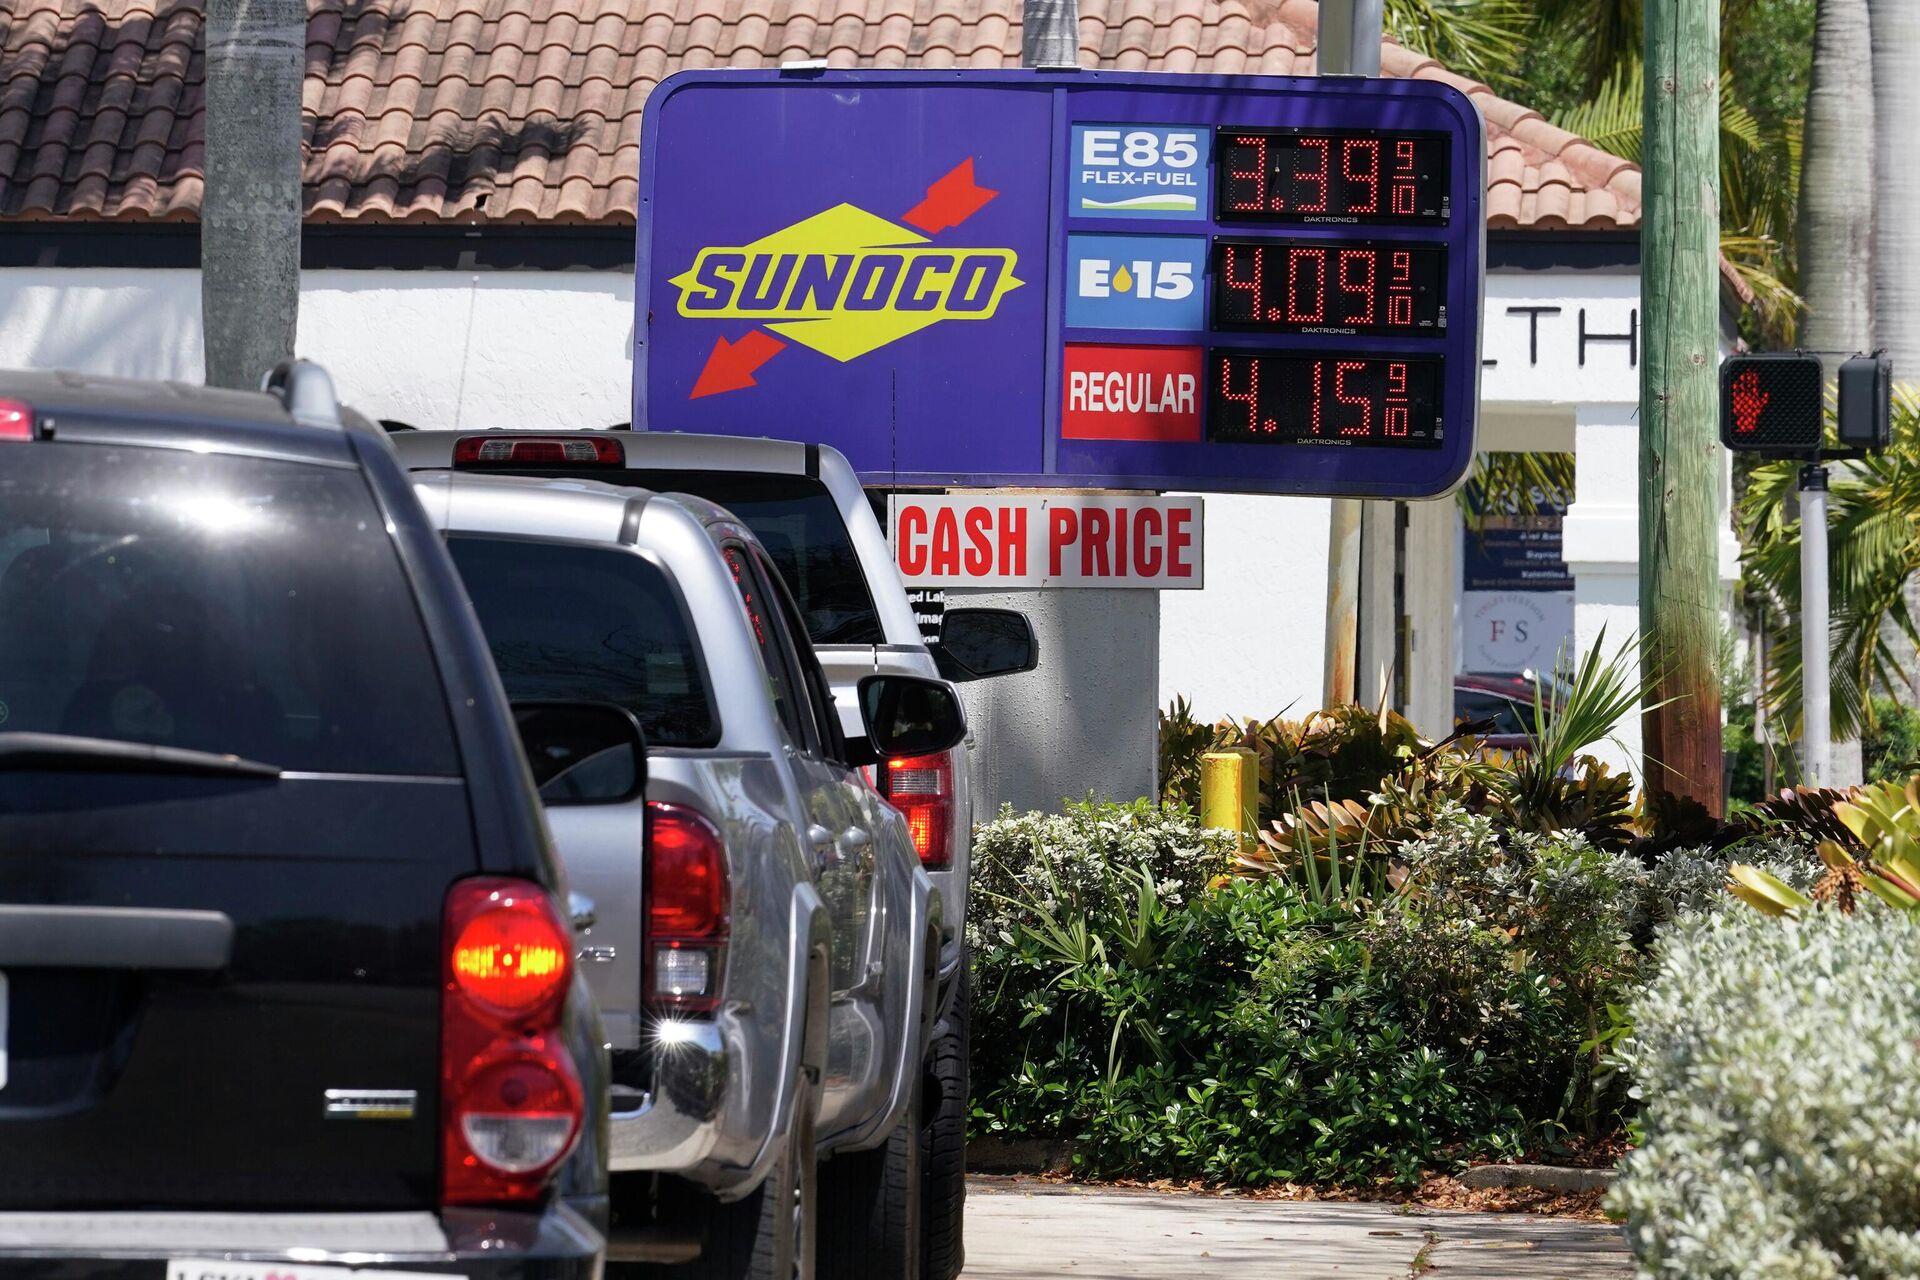 FILE - Cars line up at a Sunoco gas station offering high-level ethanol-gasoline blends at a cost below regular gasoline, on April 13, 2022, in Delray Beach, Fla. Just as Americans gear up for summer road trips, the price of oil remains stubbornly high, pushing prices at the gas pump to painful heights. AAA said Tuesday, May 10, 2022, drivers are paying $4.37 for a gallon of regular gasoline. - Sputnik International, 1920, 14.09.2022